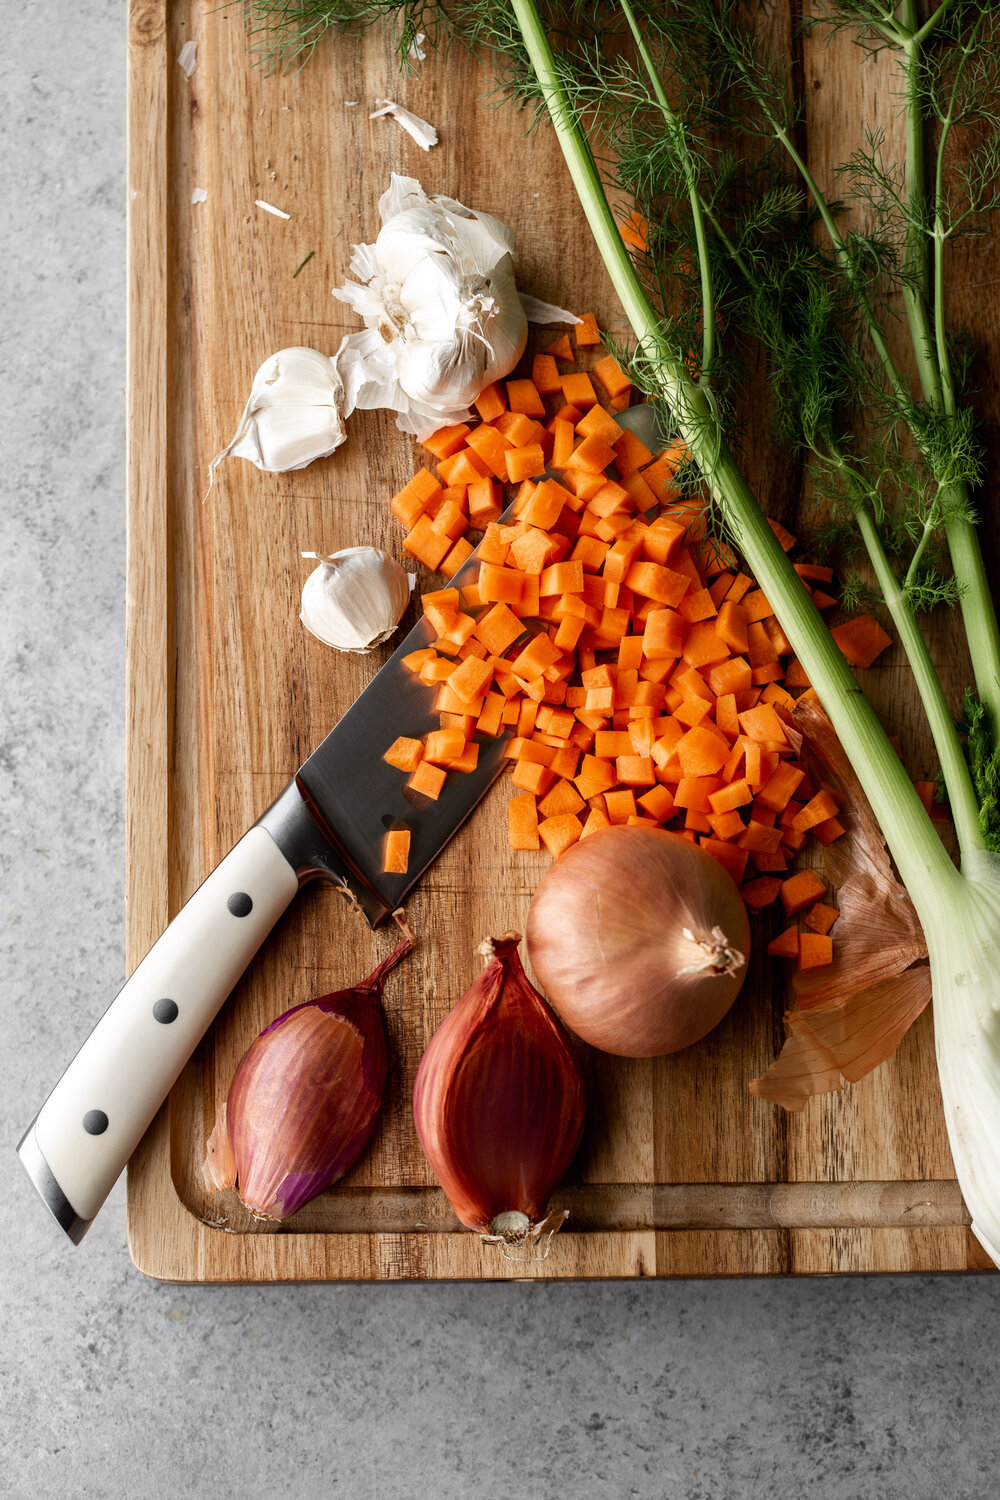 diced carrots on cutting board with shallot and fennel